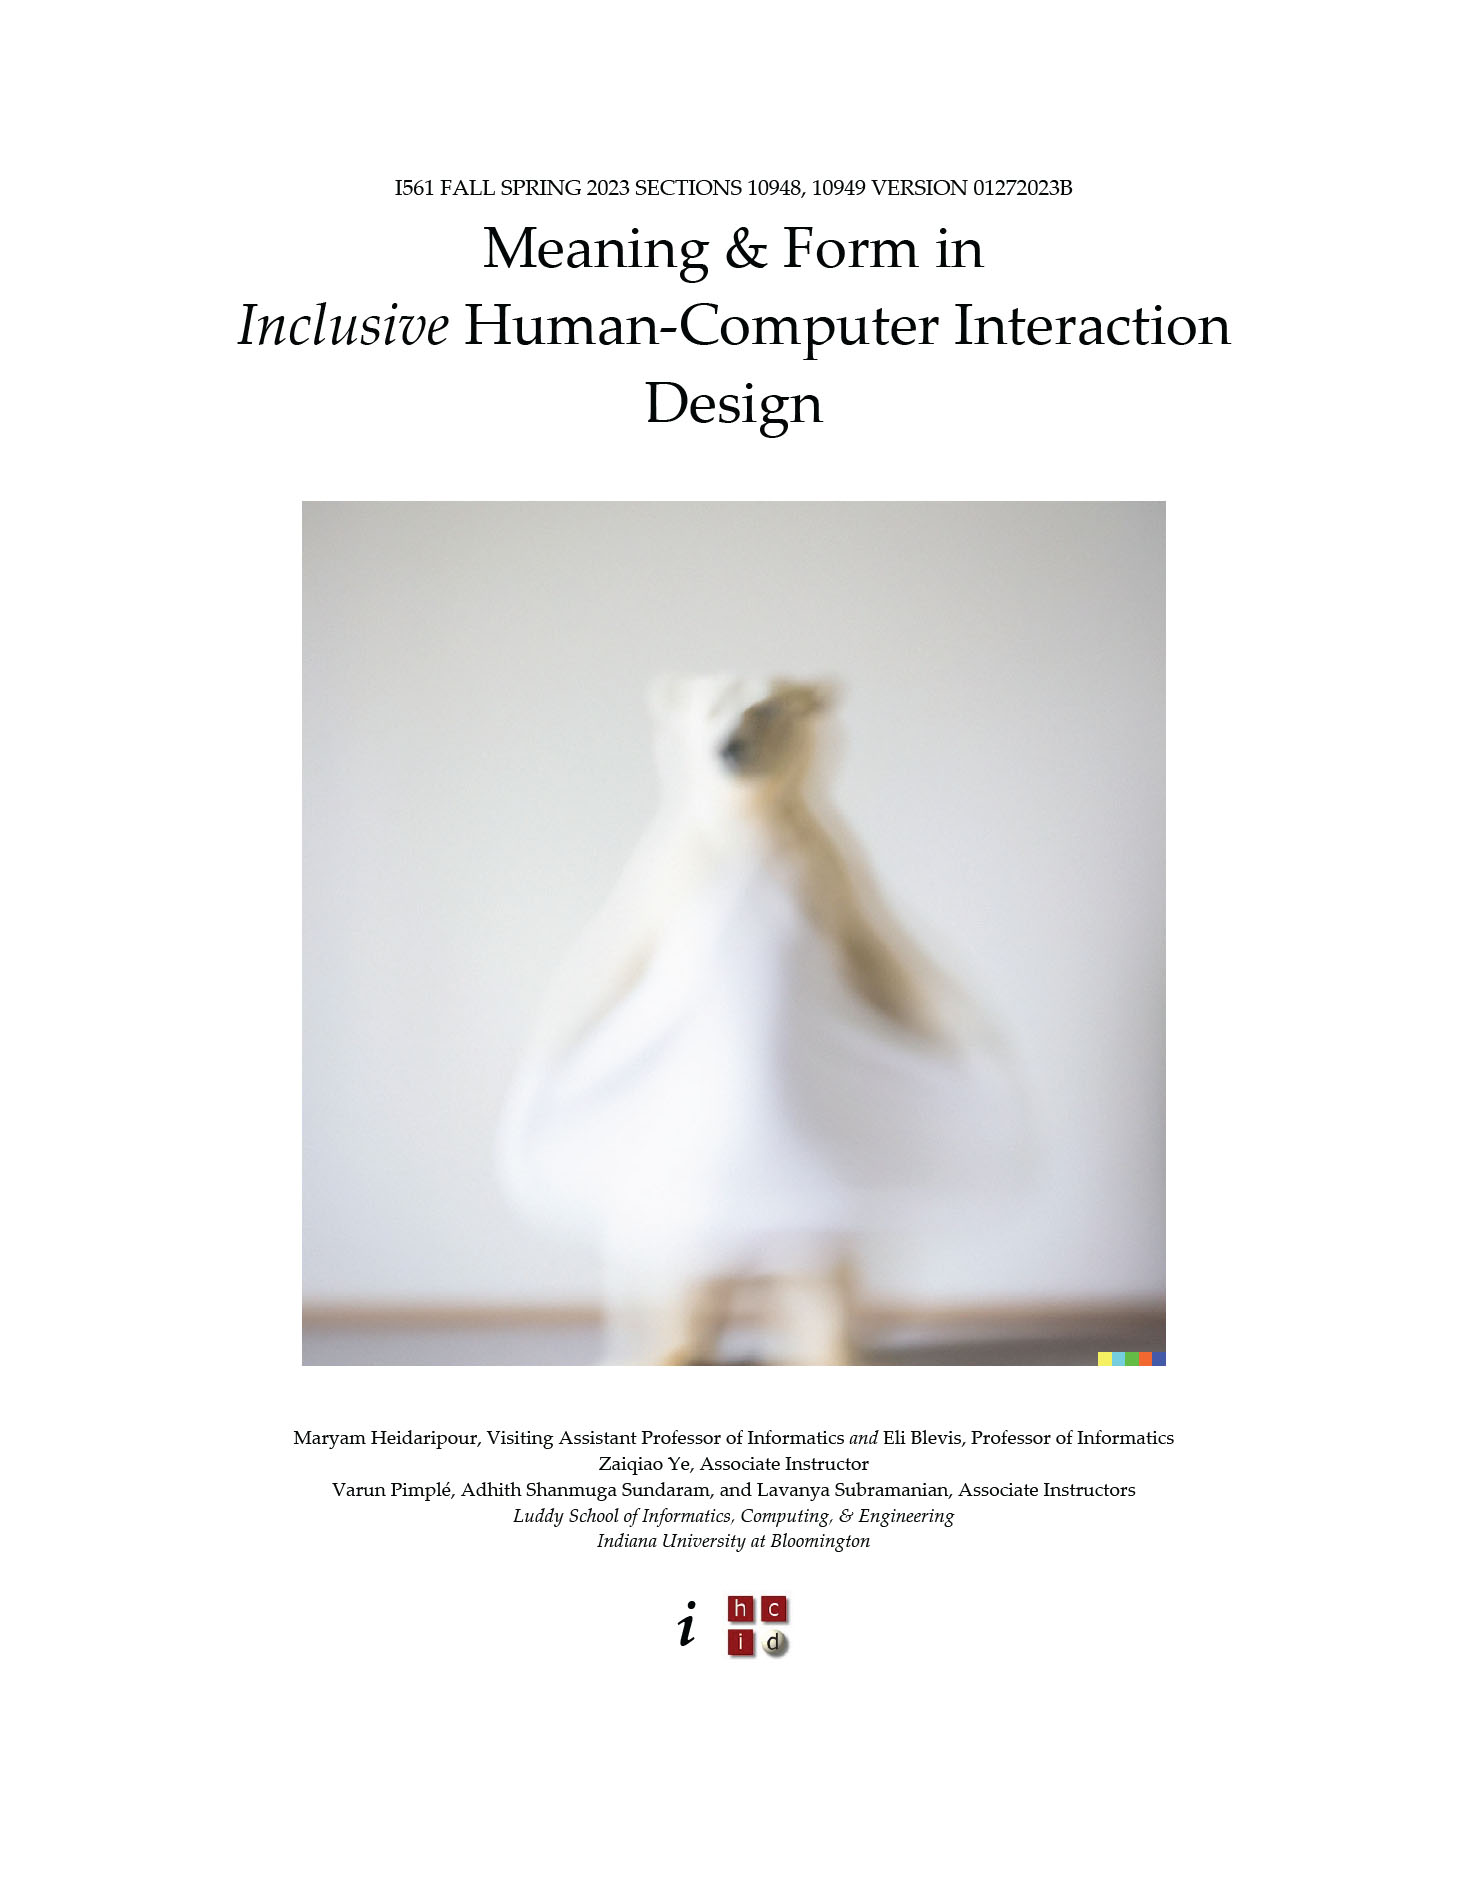 Syllabus: Meaning and Form in HCI/d I561 Spring 2023